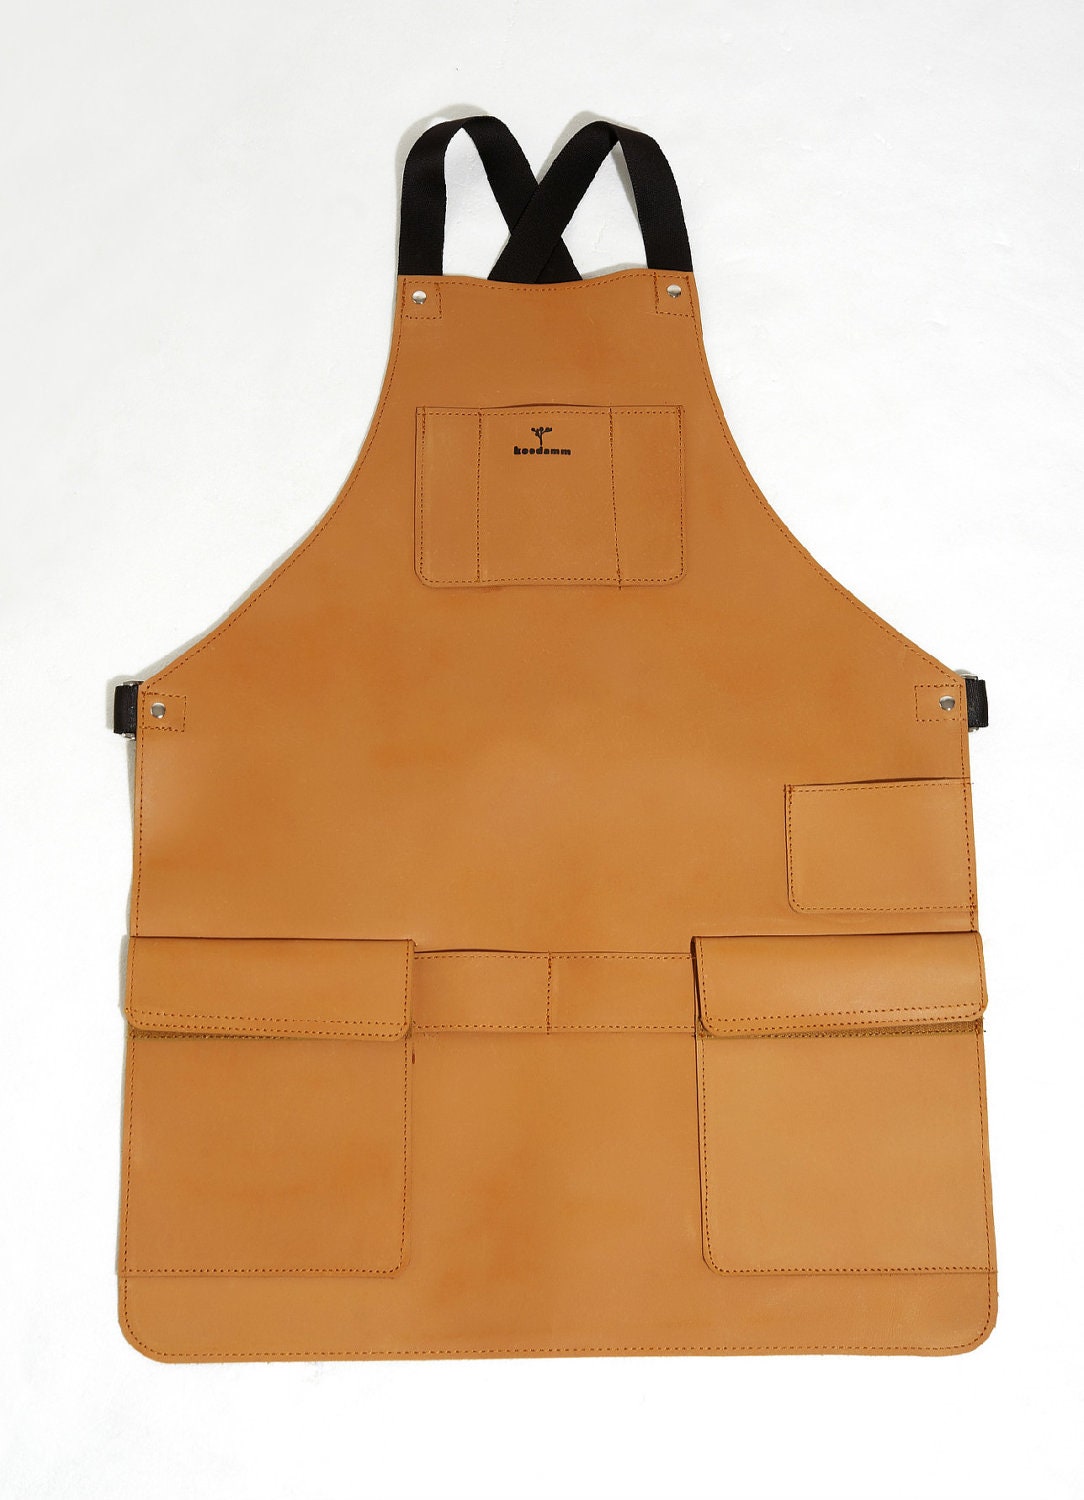 Leather Apron by iwoodlab on Etsy